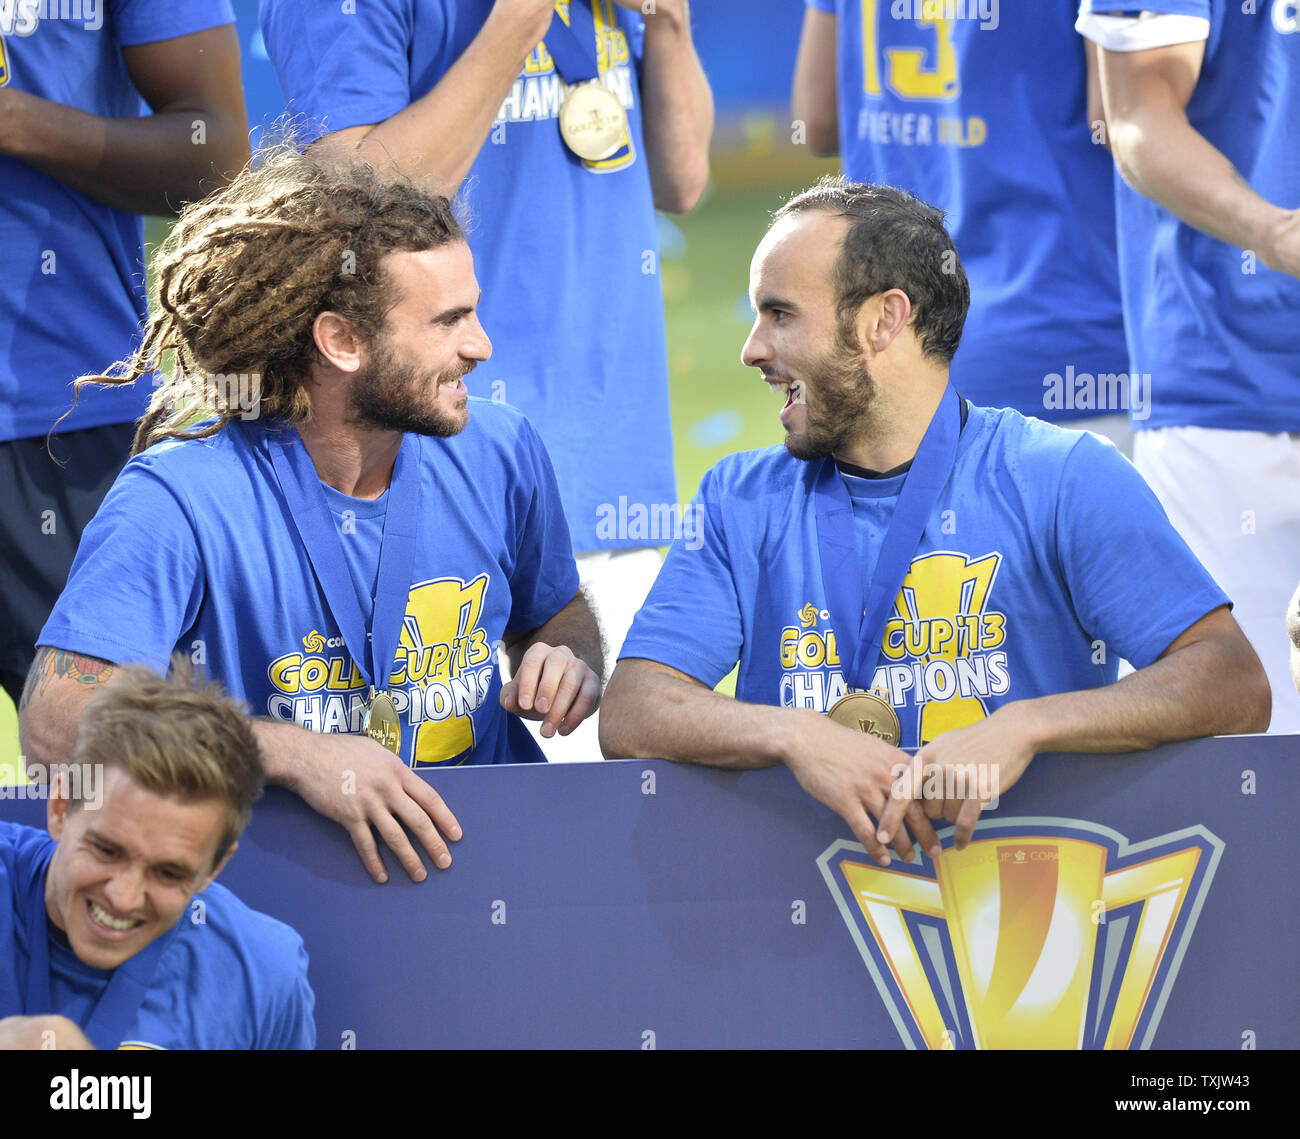 United States' Kyle Beckerman (L) talks with teammate Landon Donovan after defeating Panama in the 2013 CONCACAF Gold Cup Final at Soldier Field in Chicago on July 28, 2013. The United States won 1-0.     UPI/Brian Kersey Stock Photo